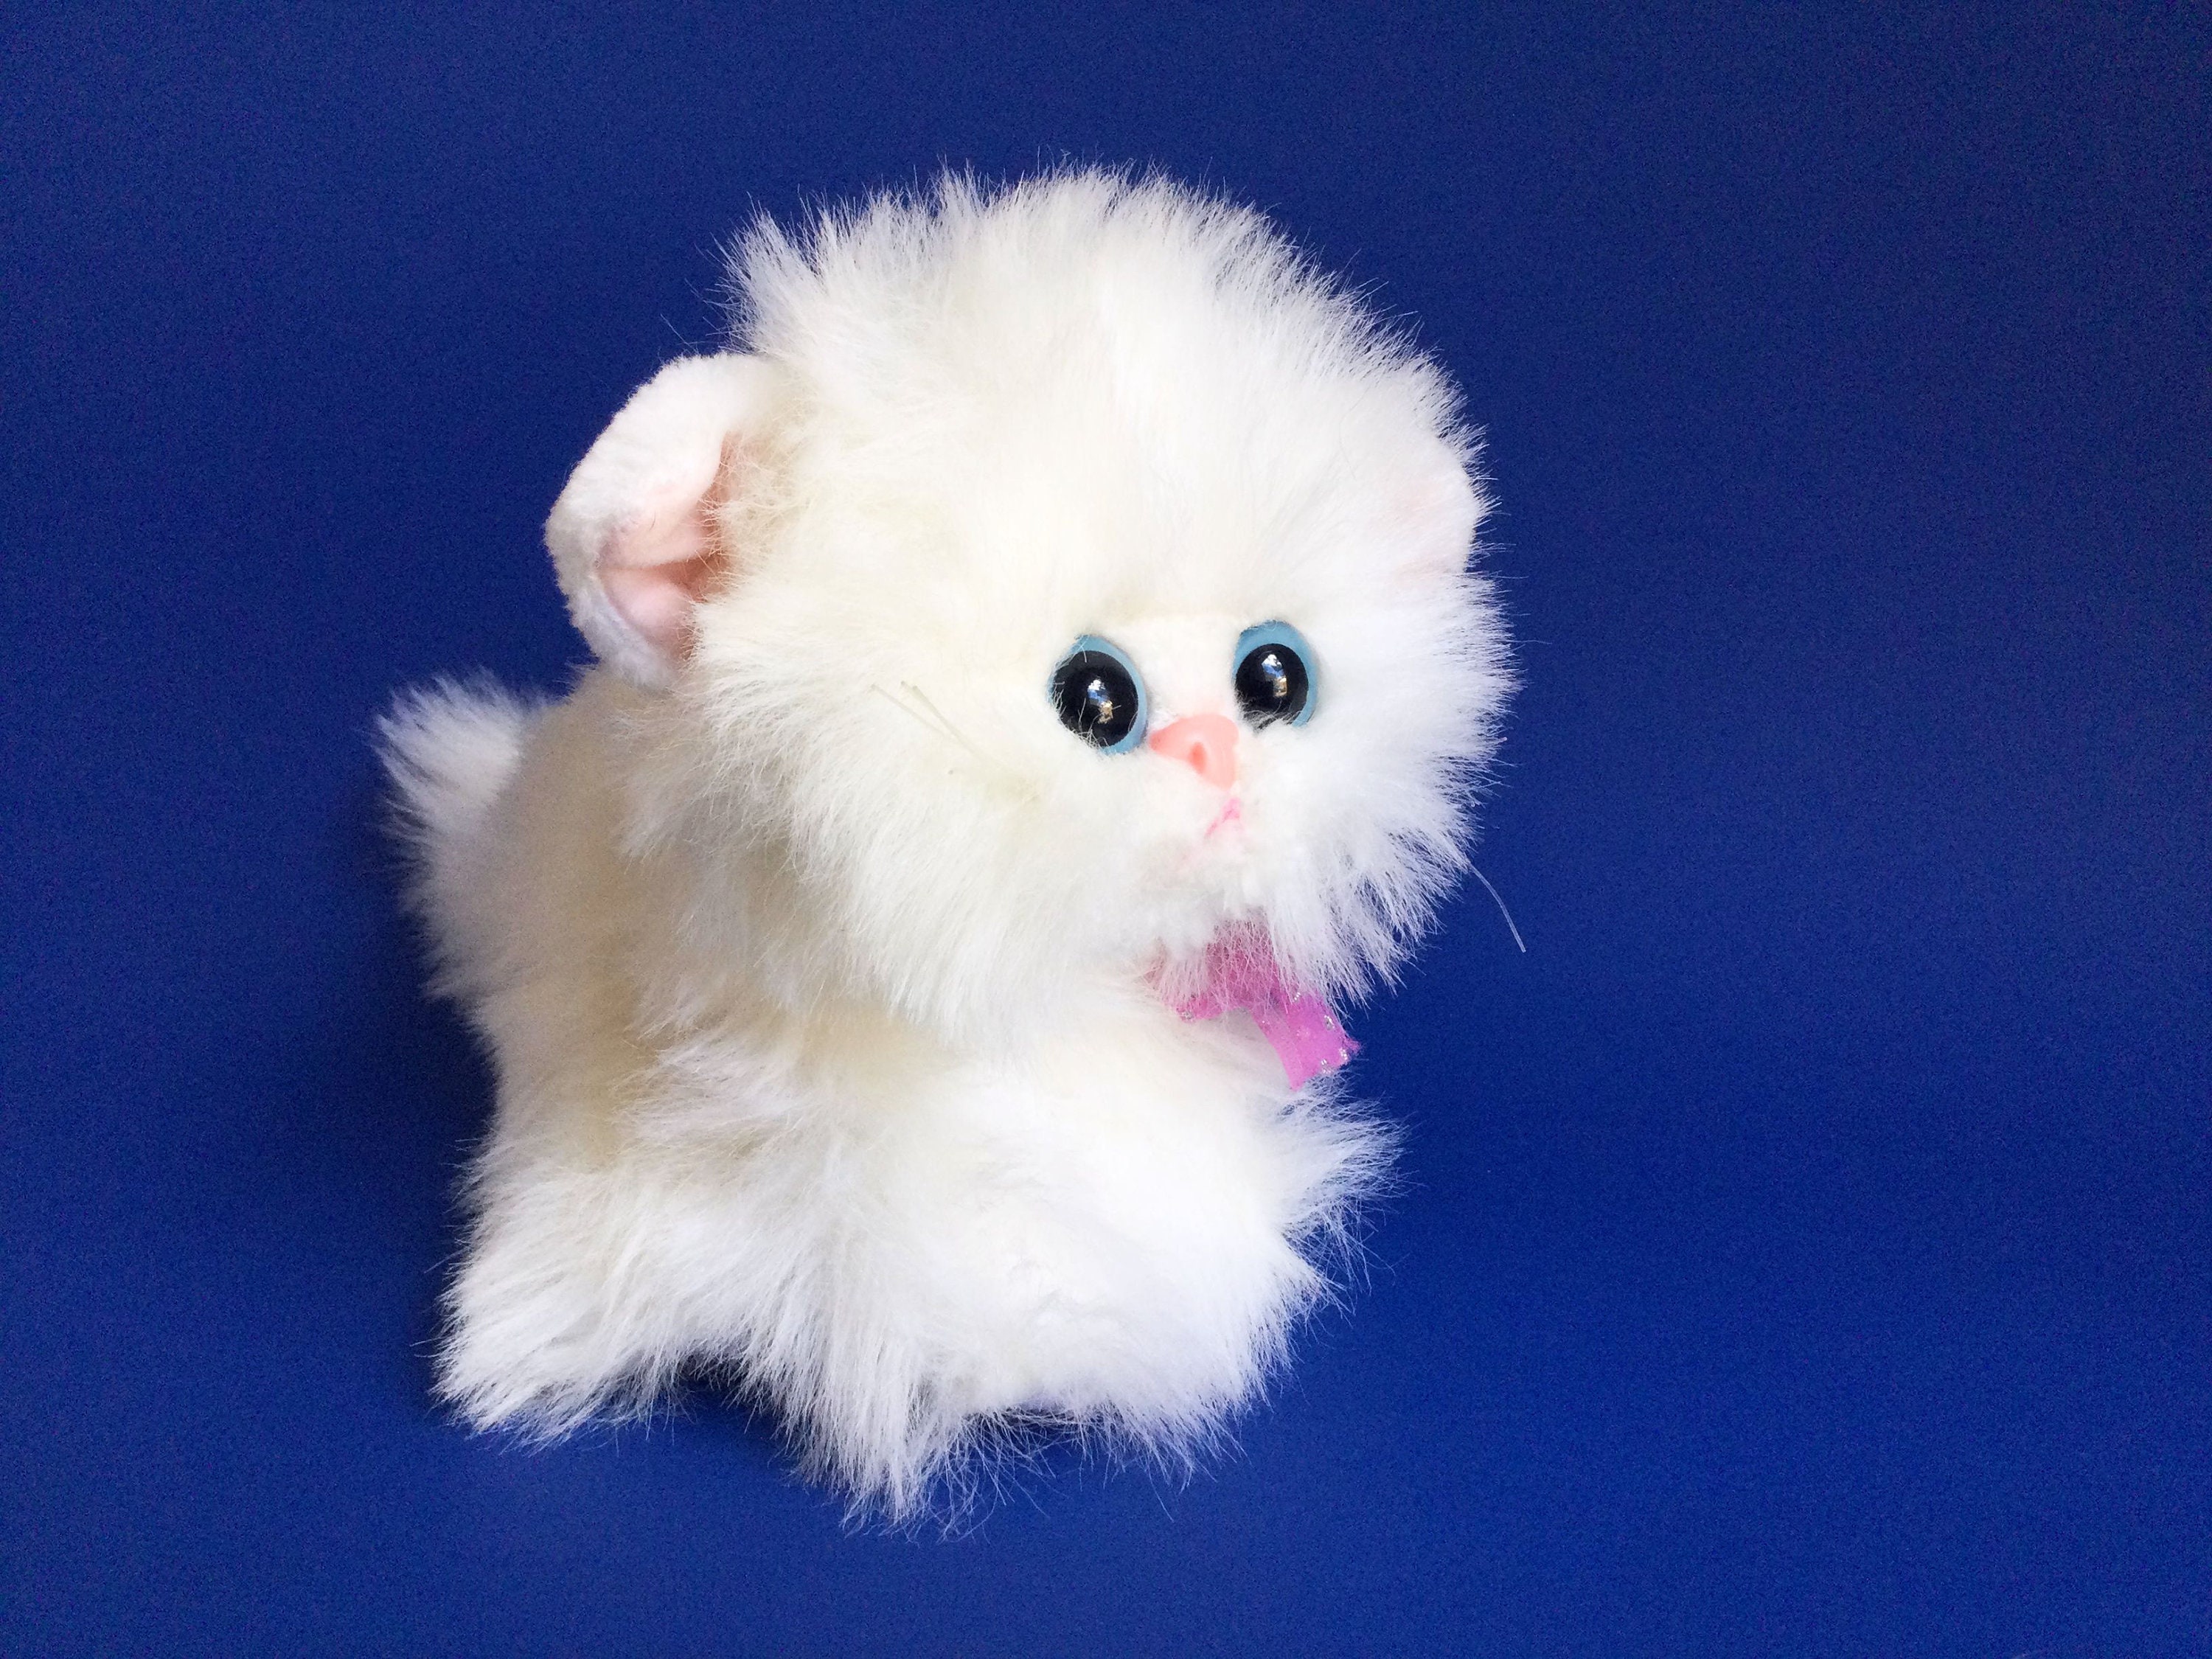 RARE vintage des années 1990 Tyco Kitty Kitty chatons ronronnant chat  doudou peluche Animal HTF gris blanc Orange rose arc à collectionner -   Canada